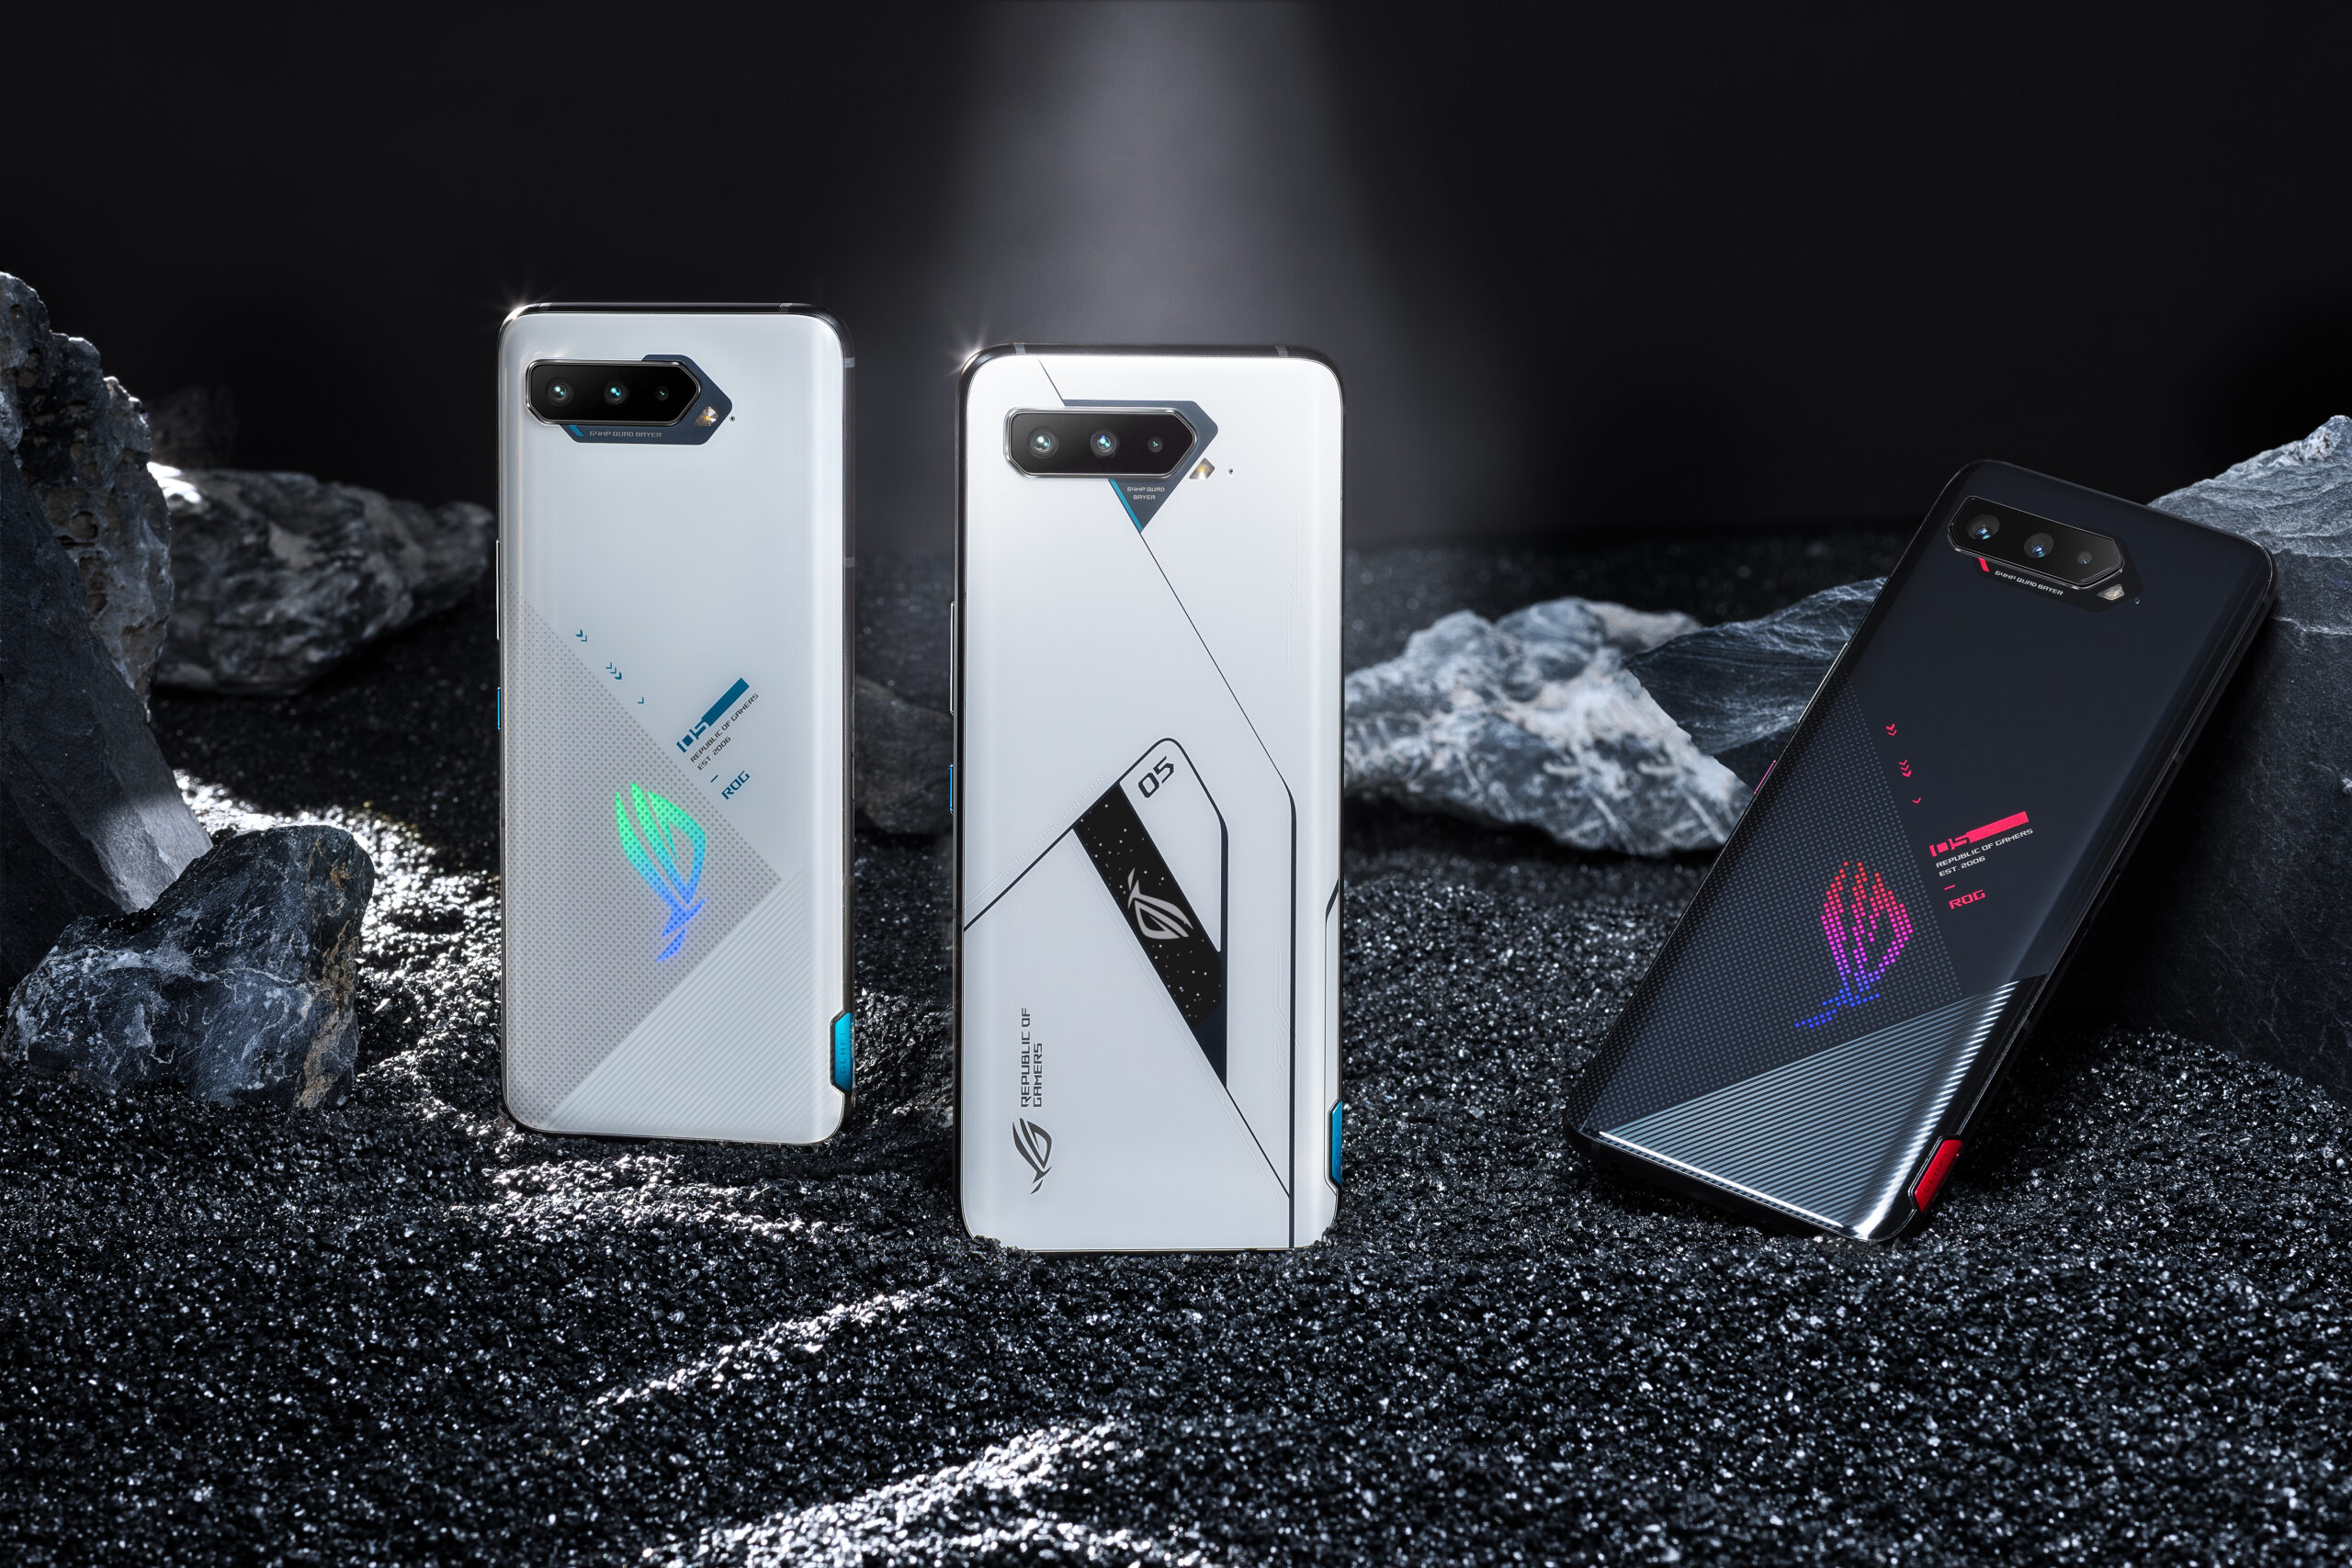 REPUBLIC OF GAMERS PHILIPPINES LAUNCHES ROG PHONE 5 SERIES, AVAILABLE STARTING APRIL 10, 2021